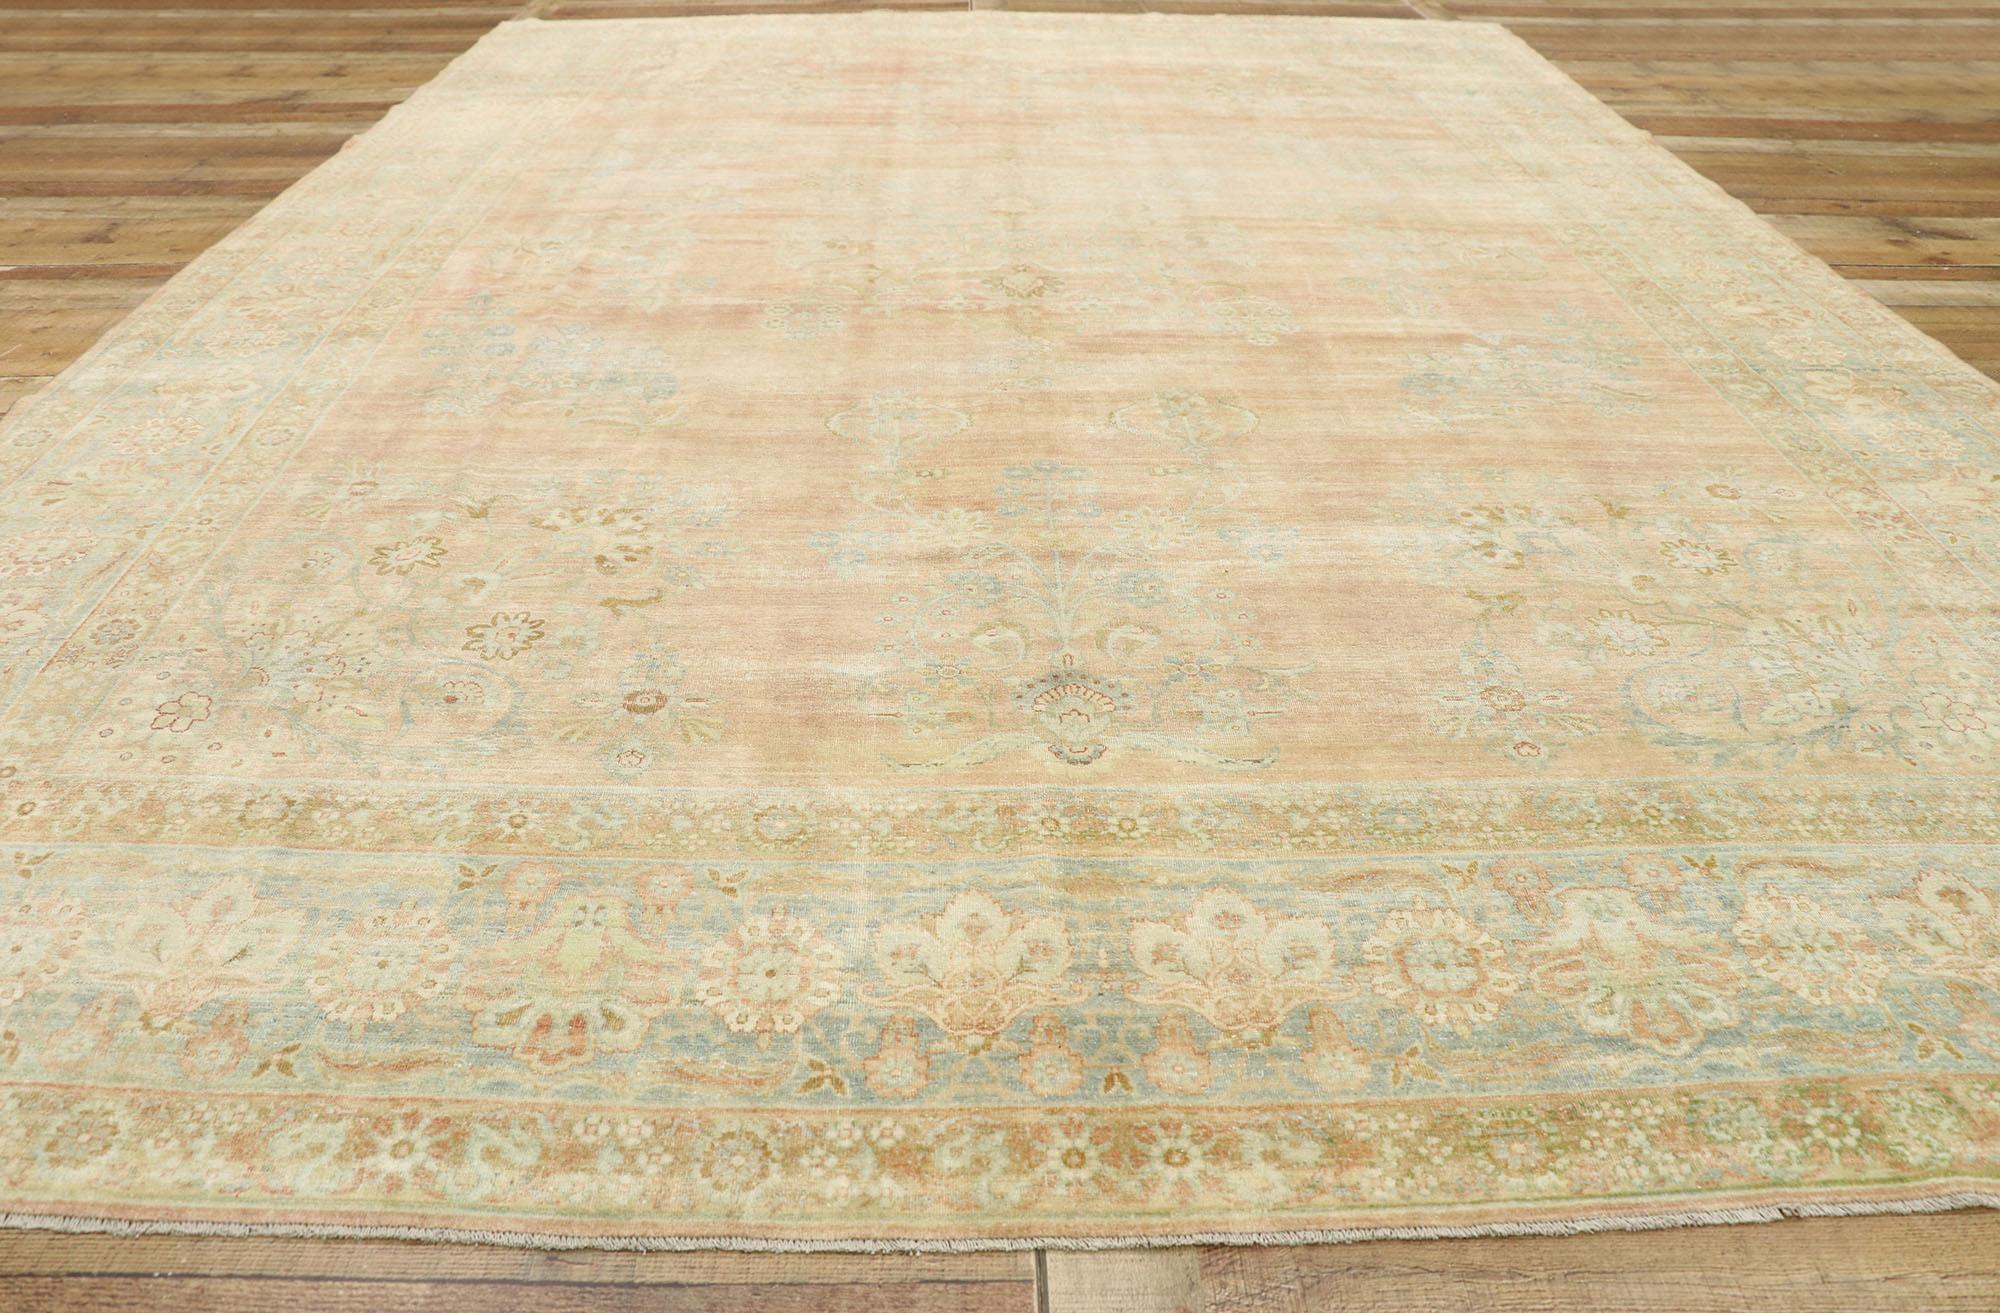 Wool Distressed Antique Persian Kerman Rug, Rustic Elegance Meets Southern Charm For Sale